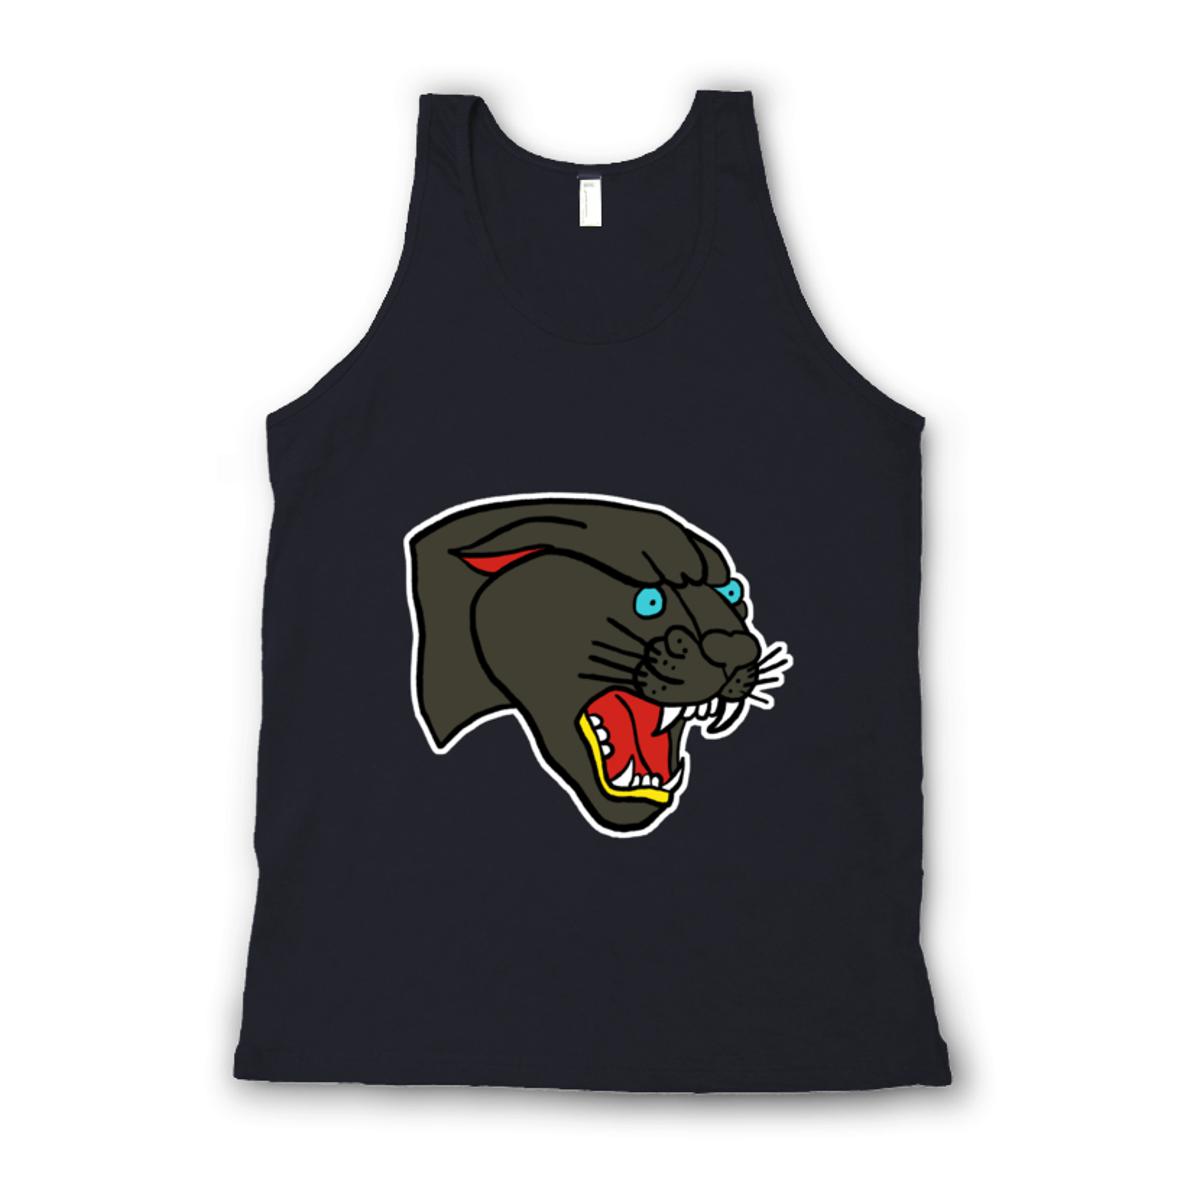 American Traditional Panther Unisex Tank Top Small black